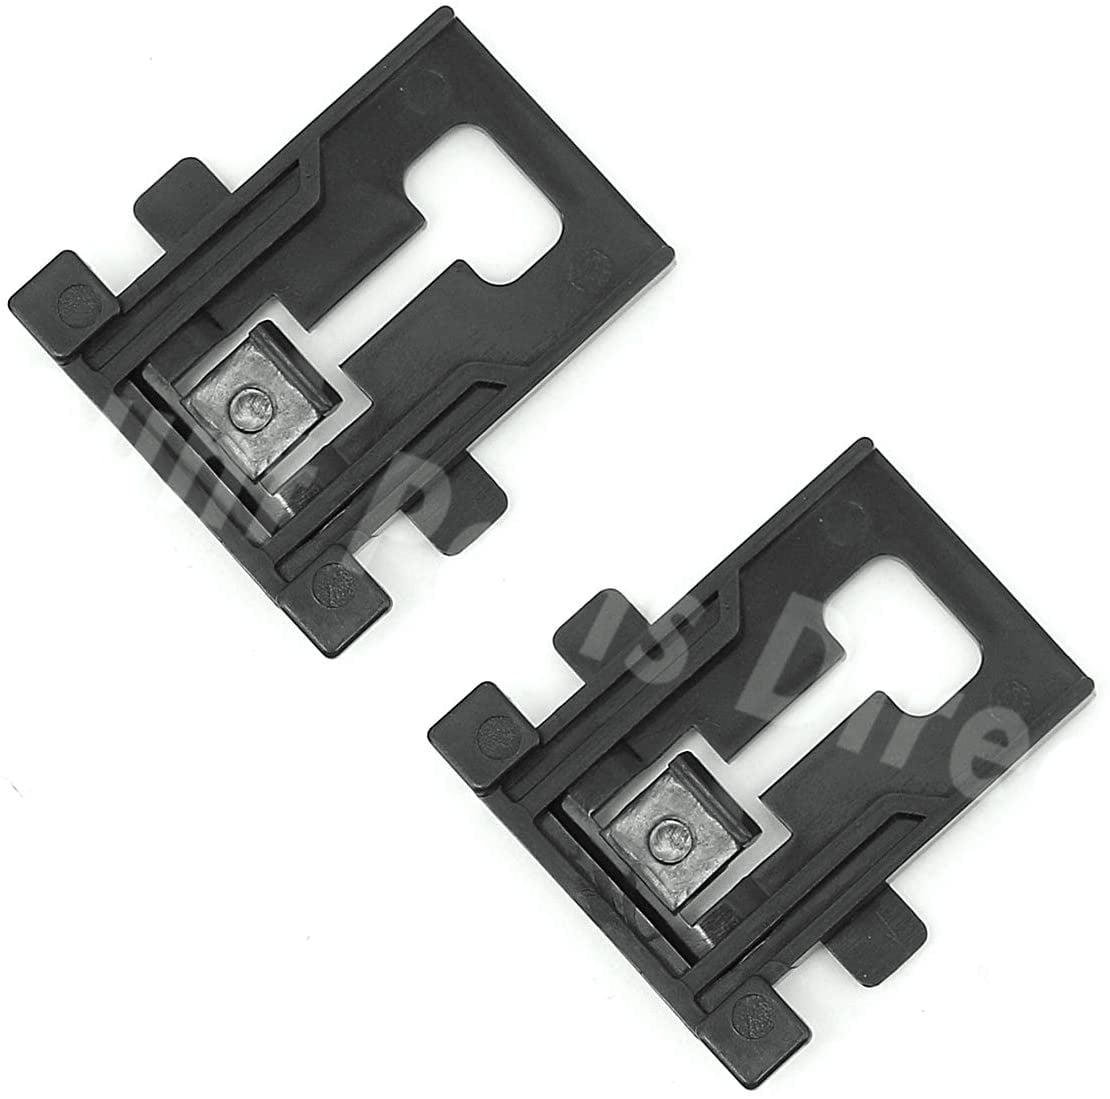 Details about   8 Packs UPGRADED W10350376 W10195840 Dishwasher Top Rack Adjuster for kenmore 